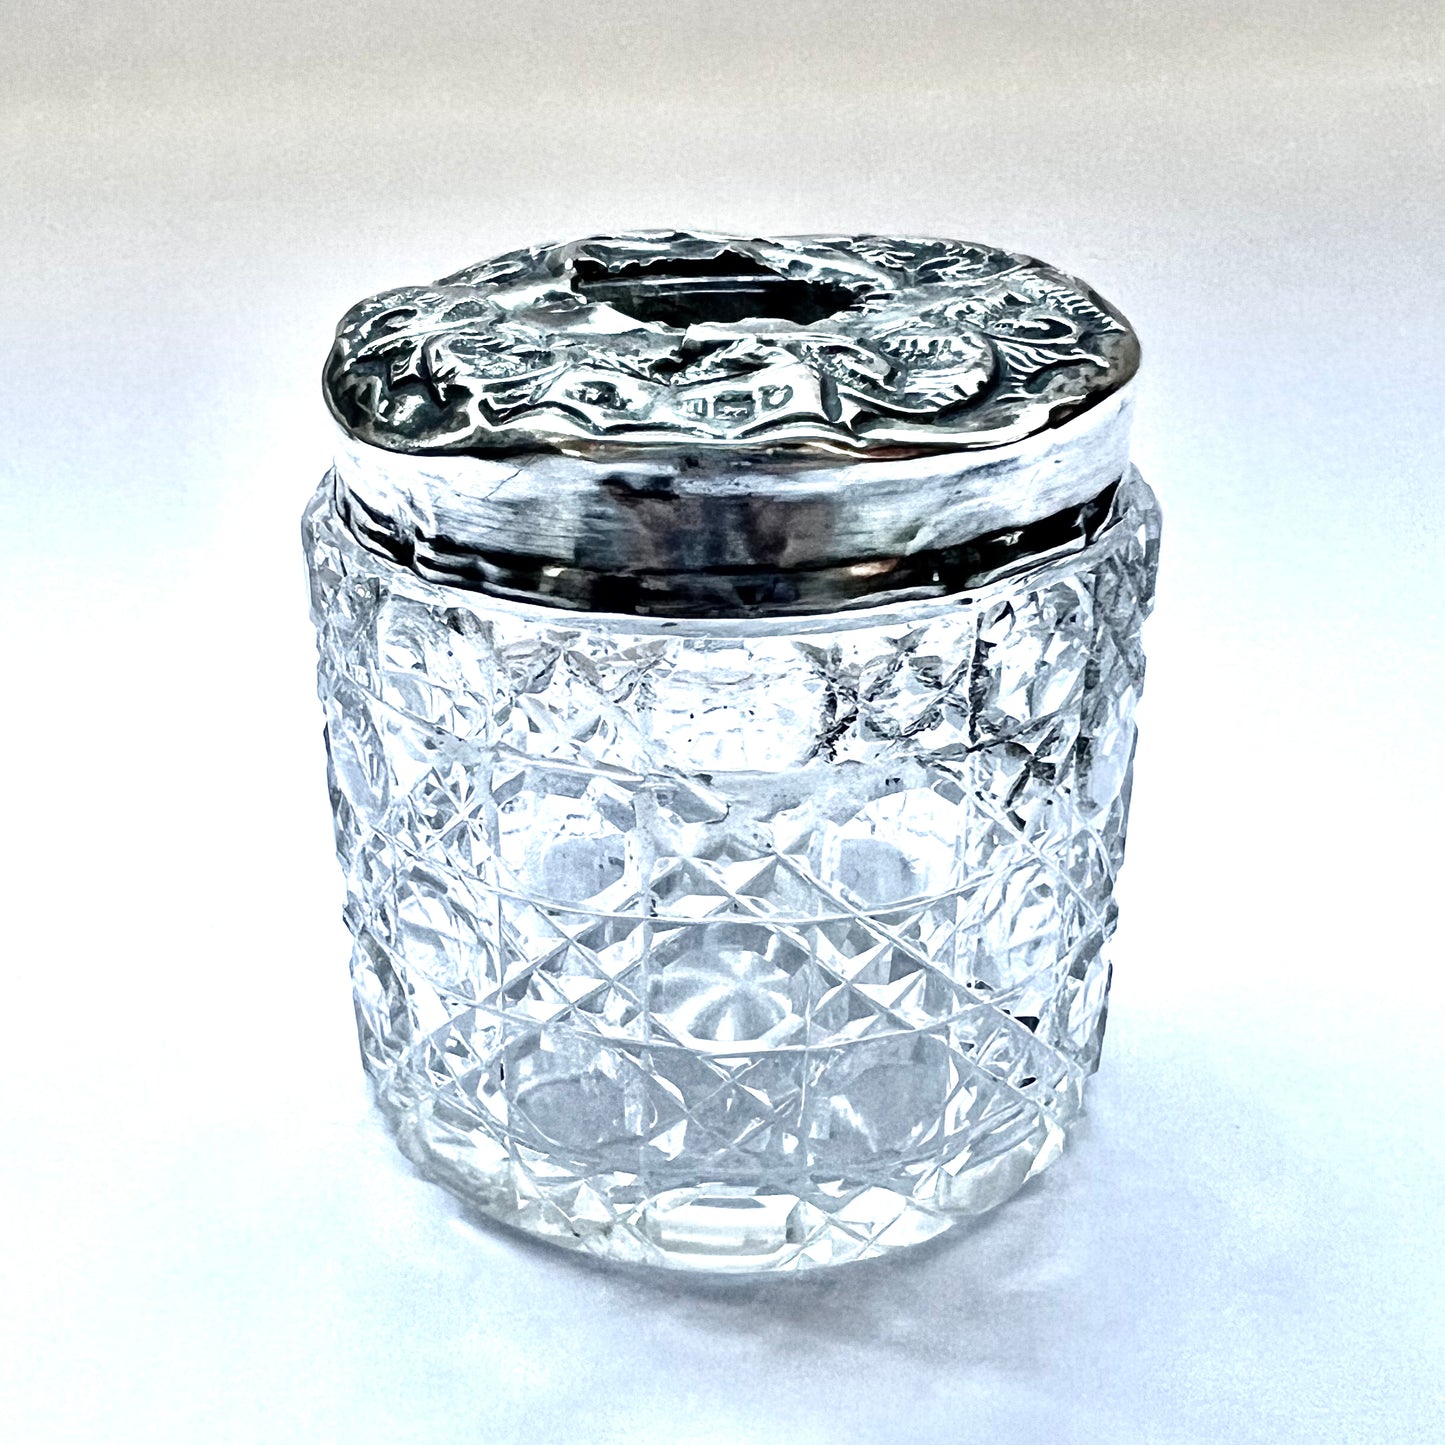 Antique sterling silver and crystal hair tidy, keeper or receiver circa London, 1907